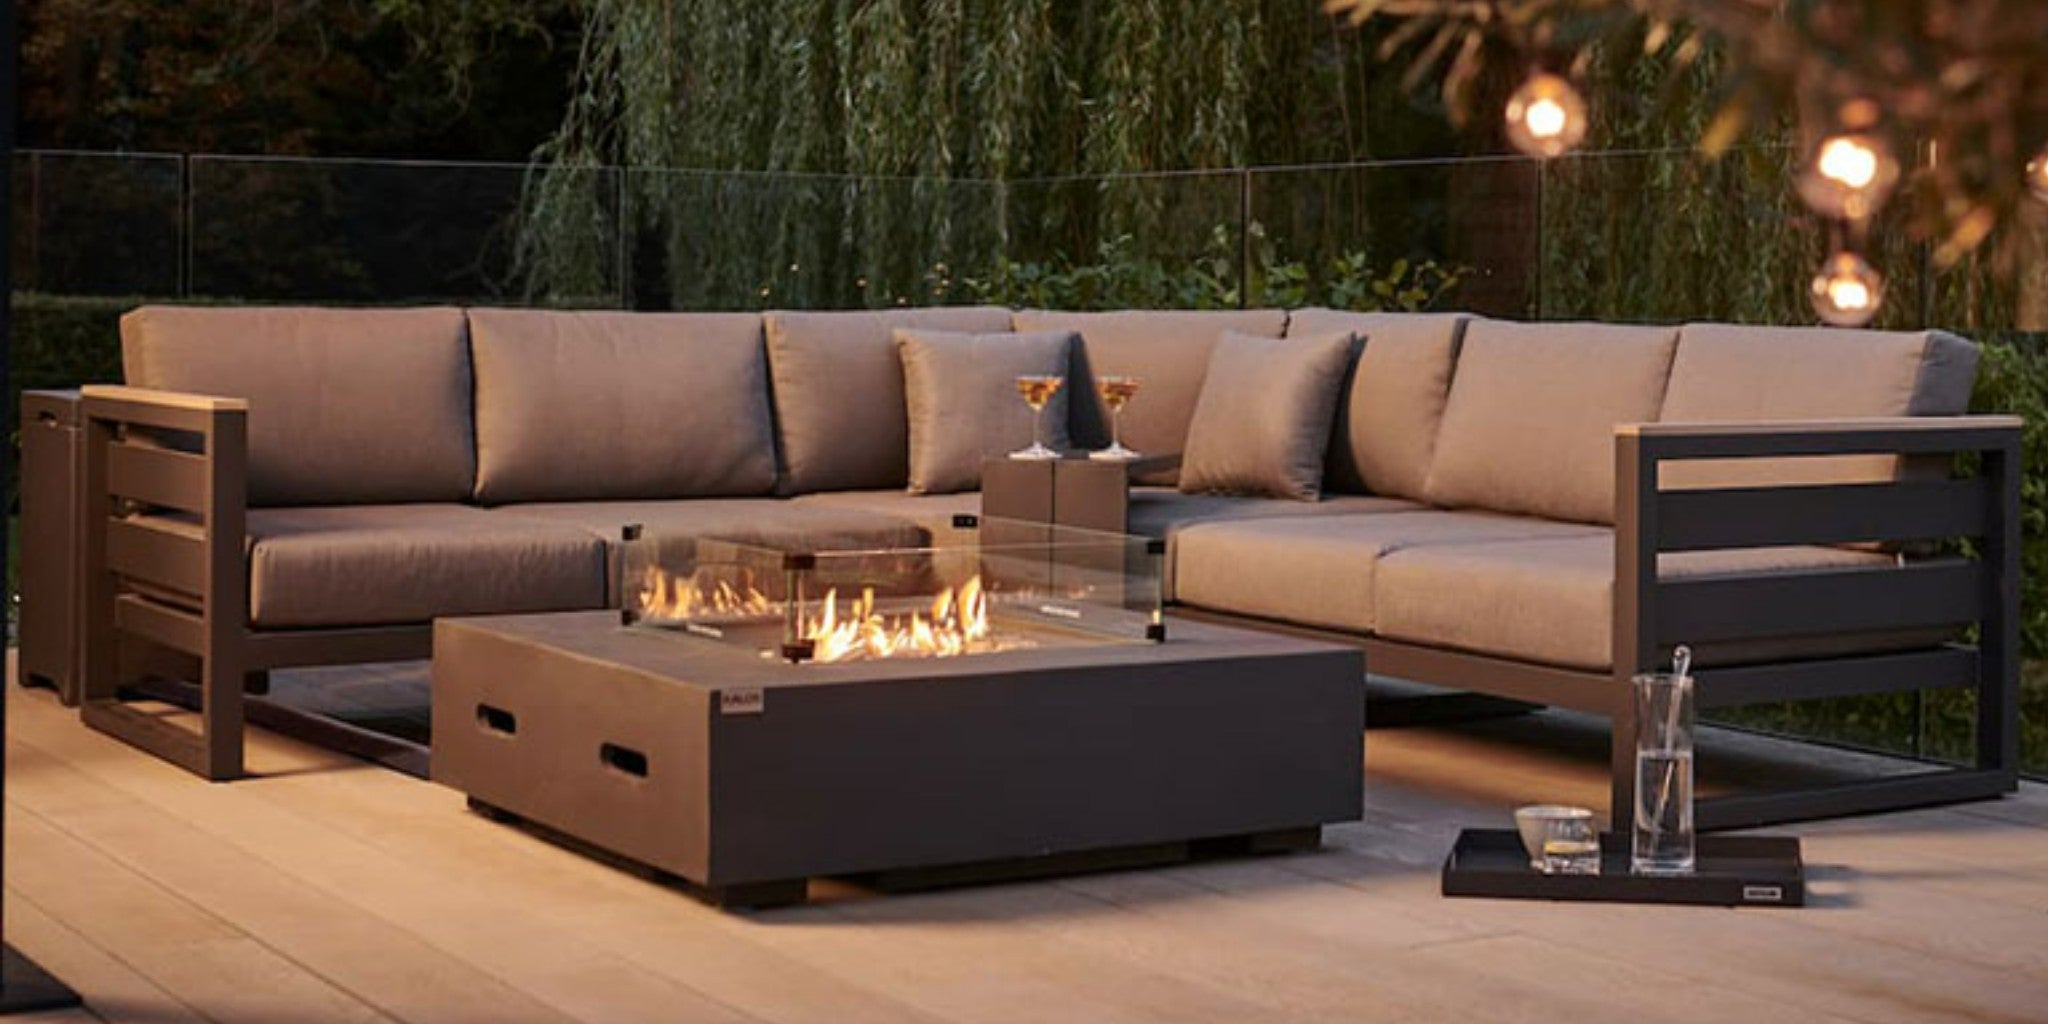 Create the Perfect Outdoor Living Space with Top-Rated Outdoor Sectional Sofas